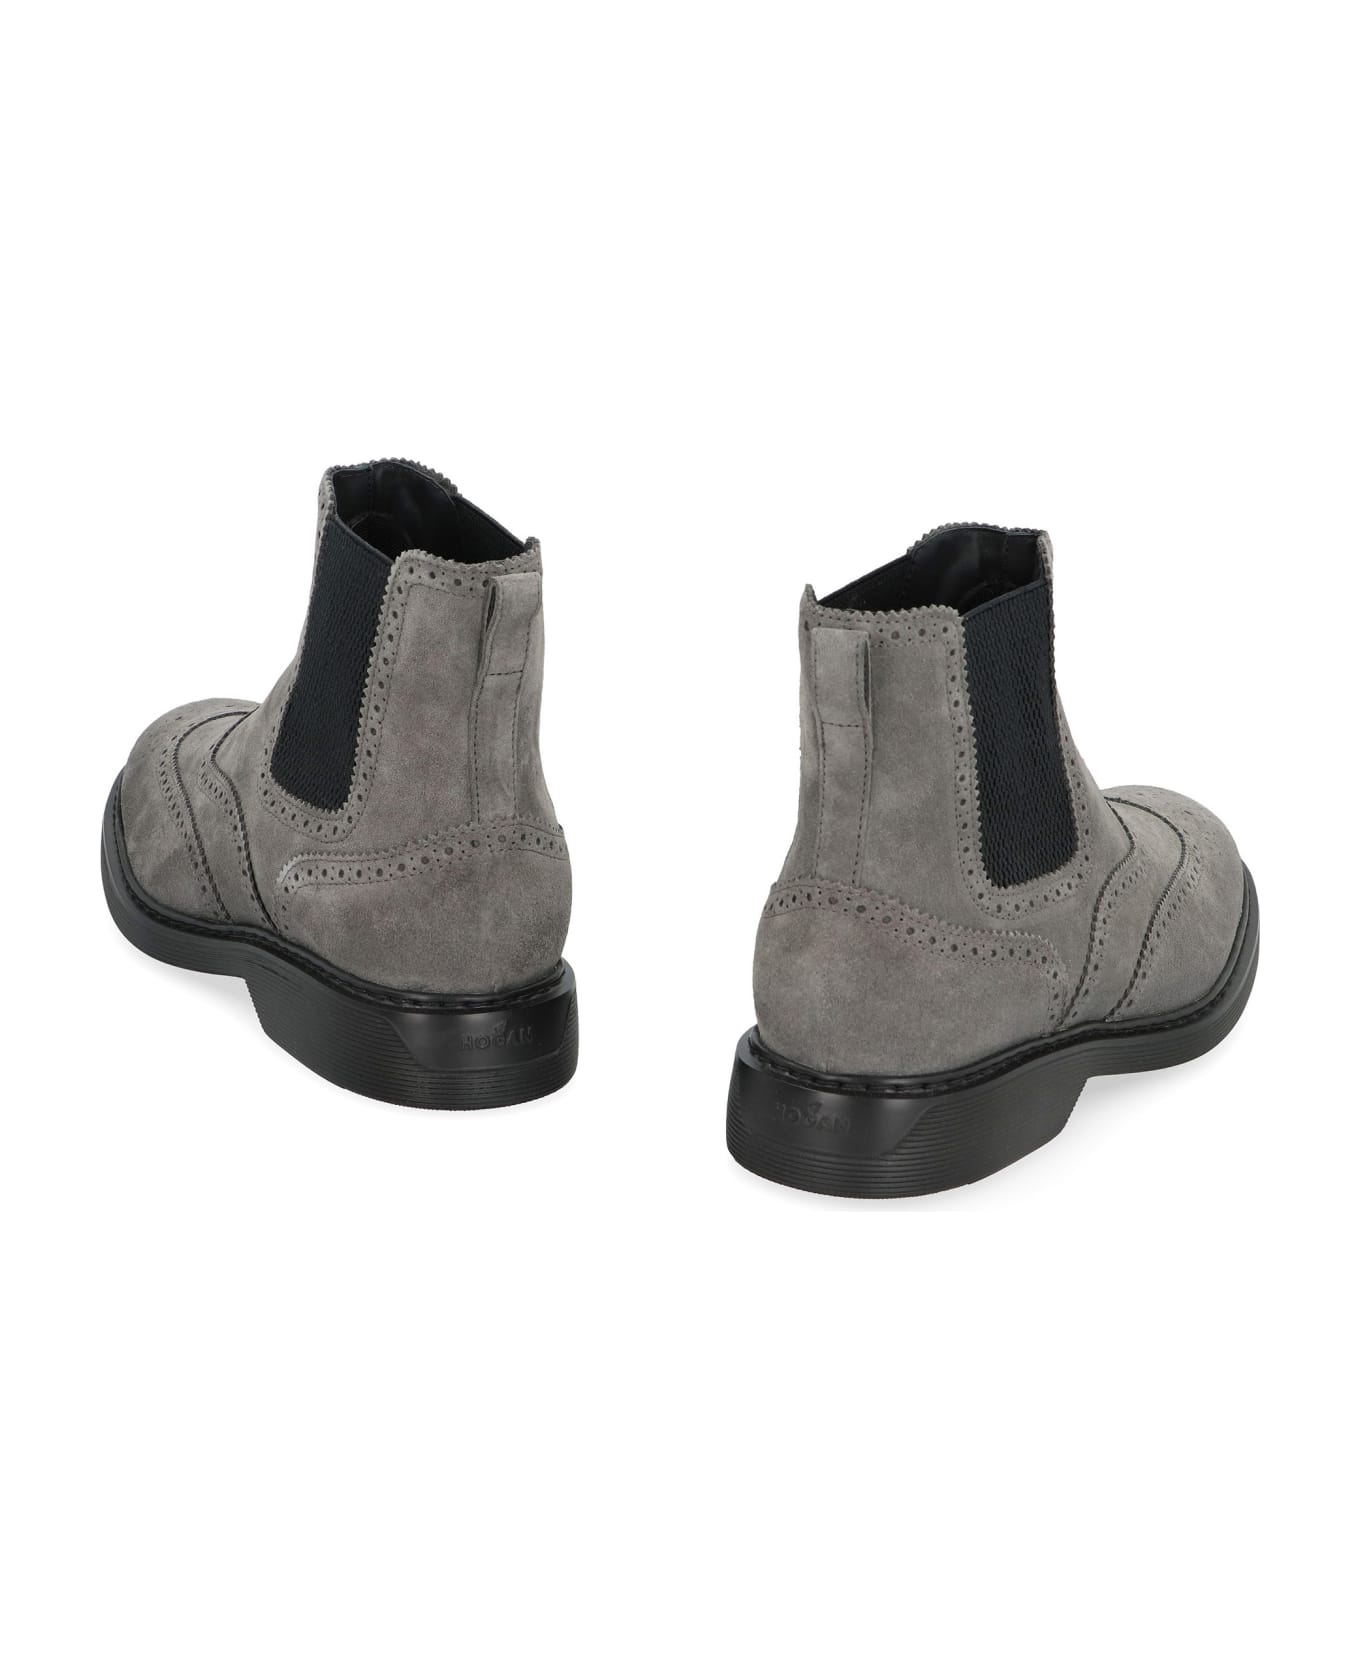 Hogan Leather Ankle Boot - grey